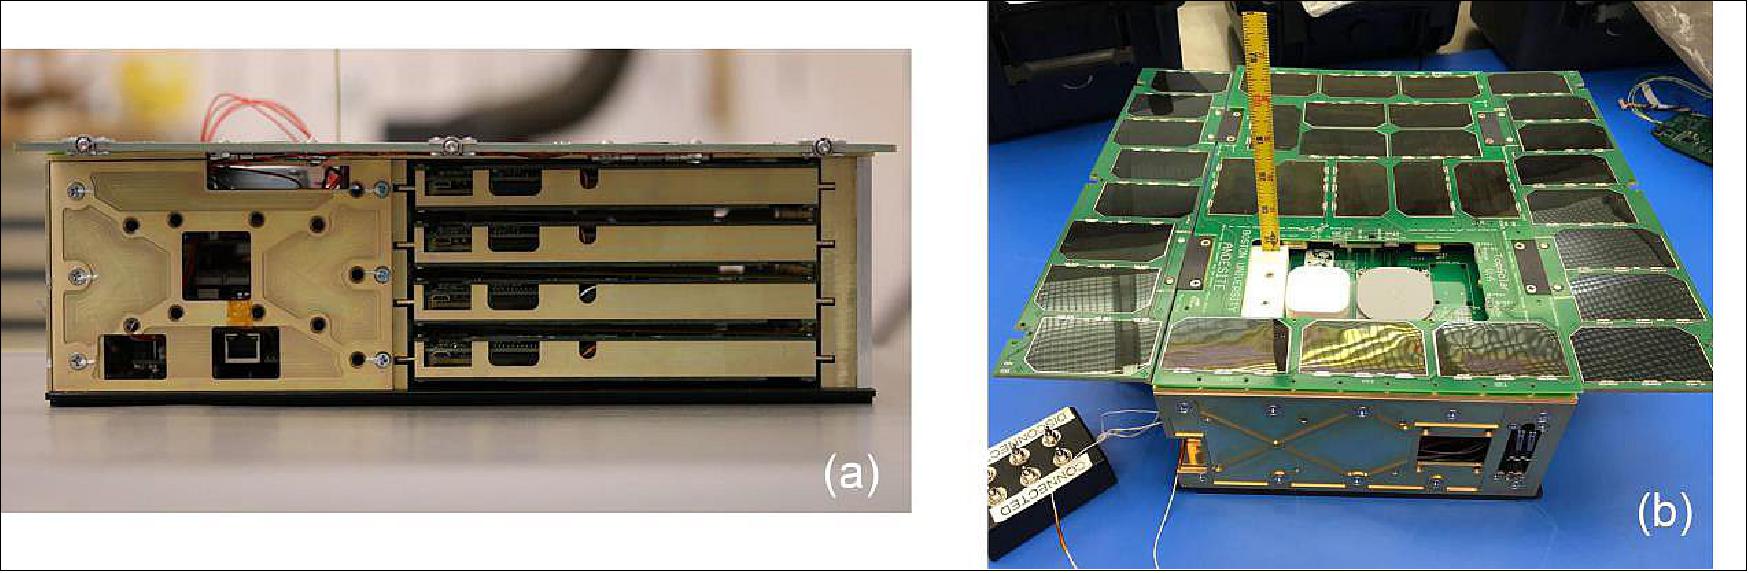 Figure 3: ANDESITE CubeSat: (a) side view, nodes packed within the bus and (b) 6U mule with deployed solar panels (image credit: Boston University)